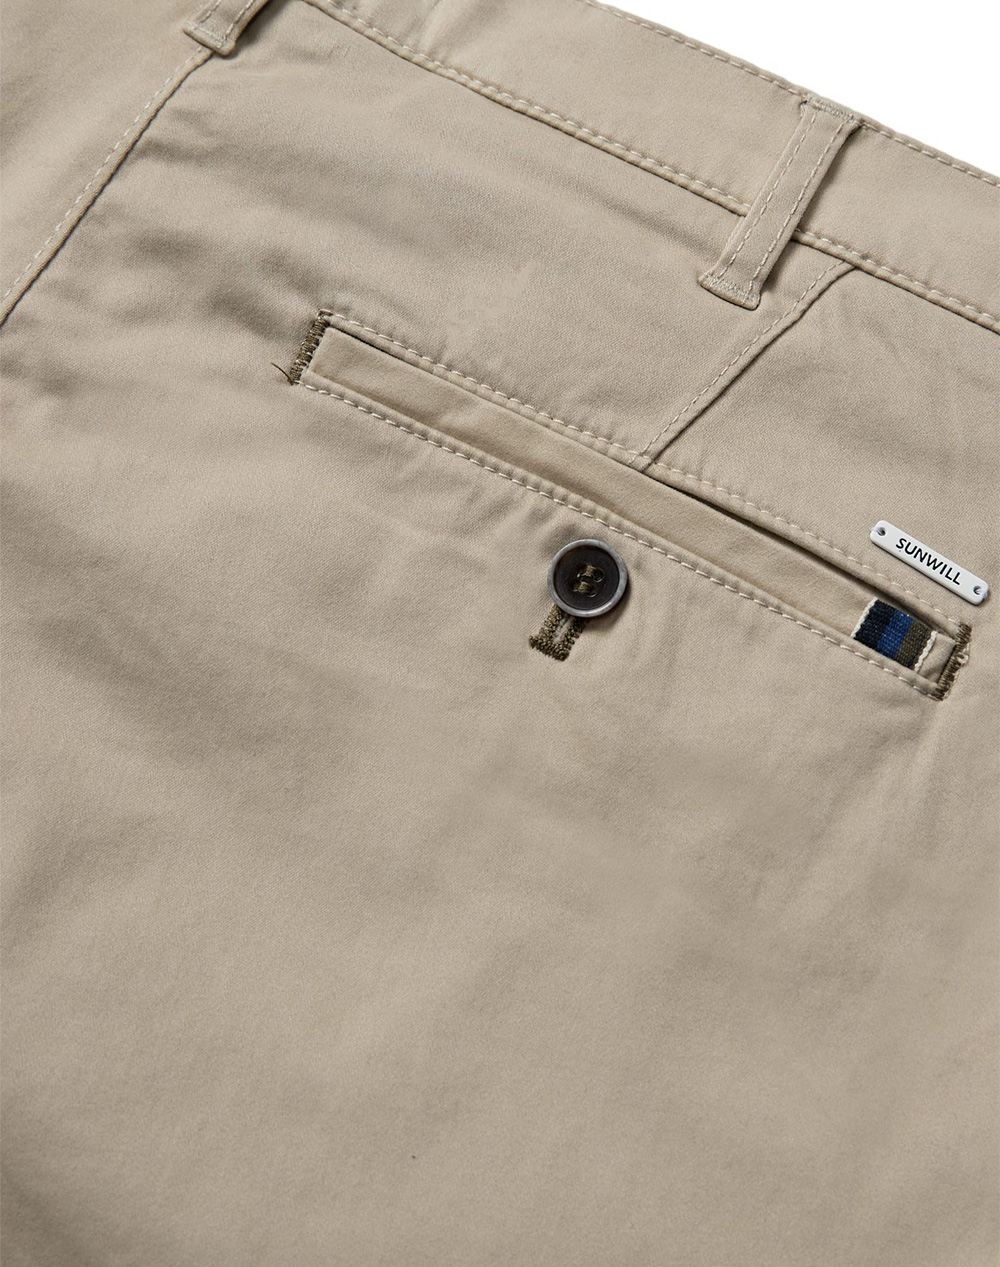 SUNWILL CHINO EXRTREME FLEXIBILITY TROUSERS